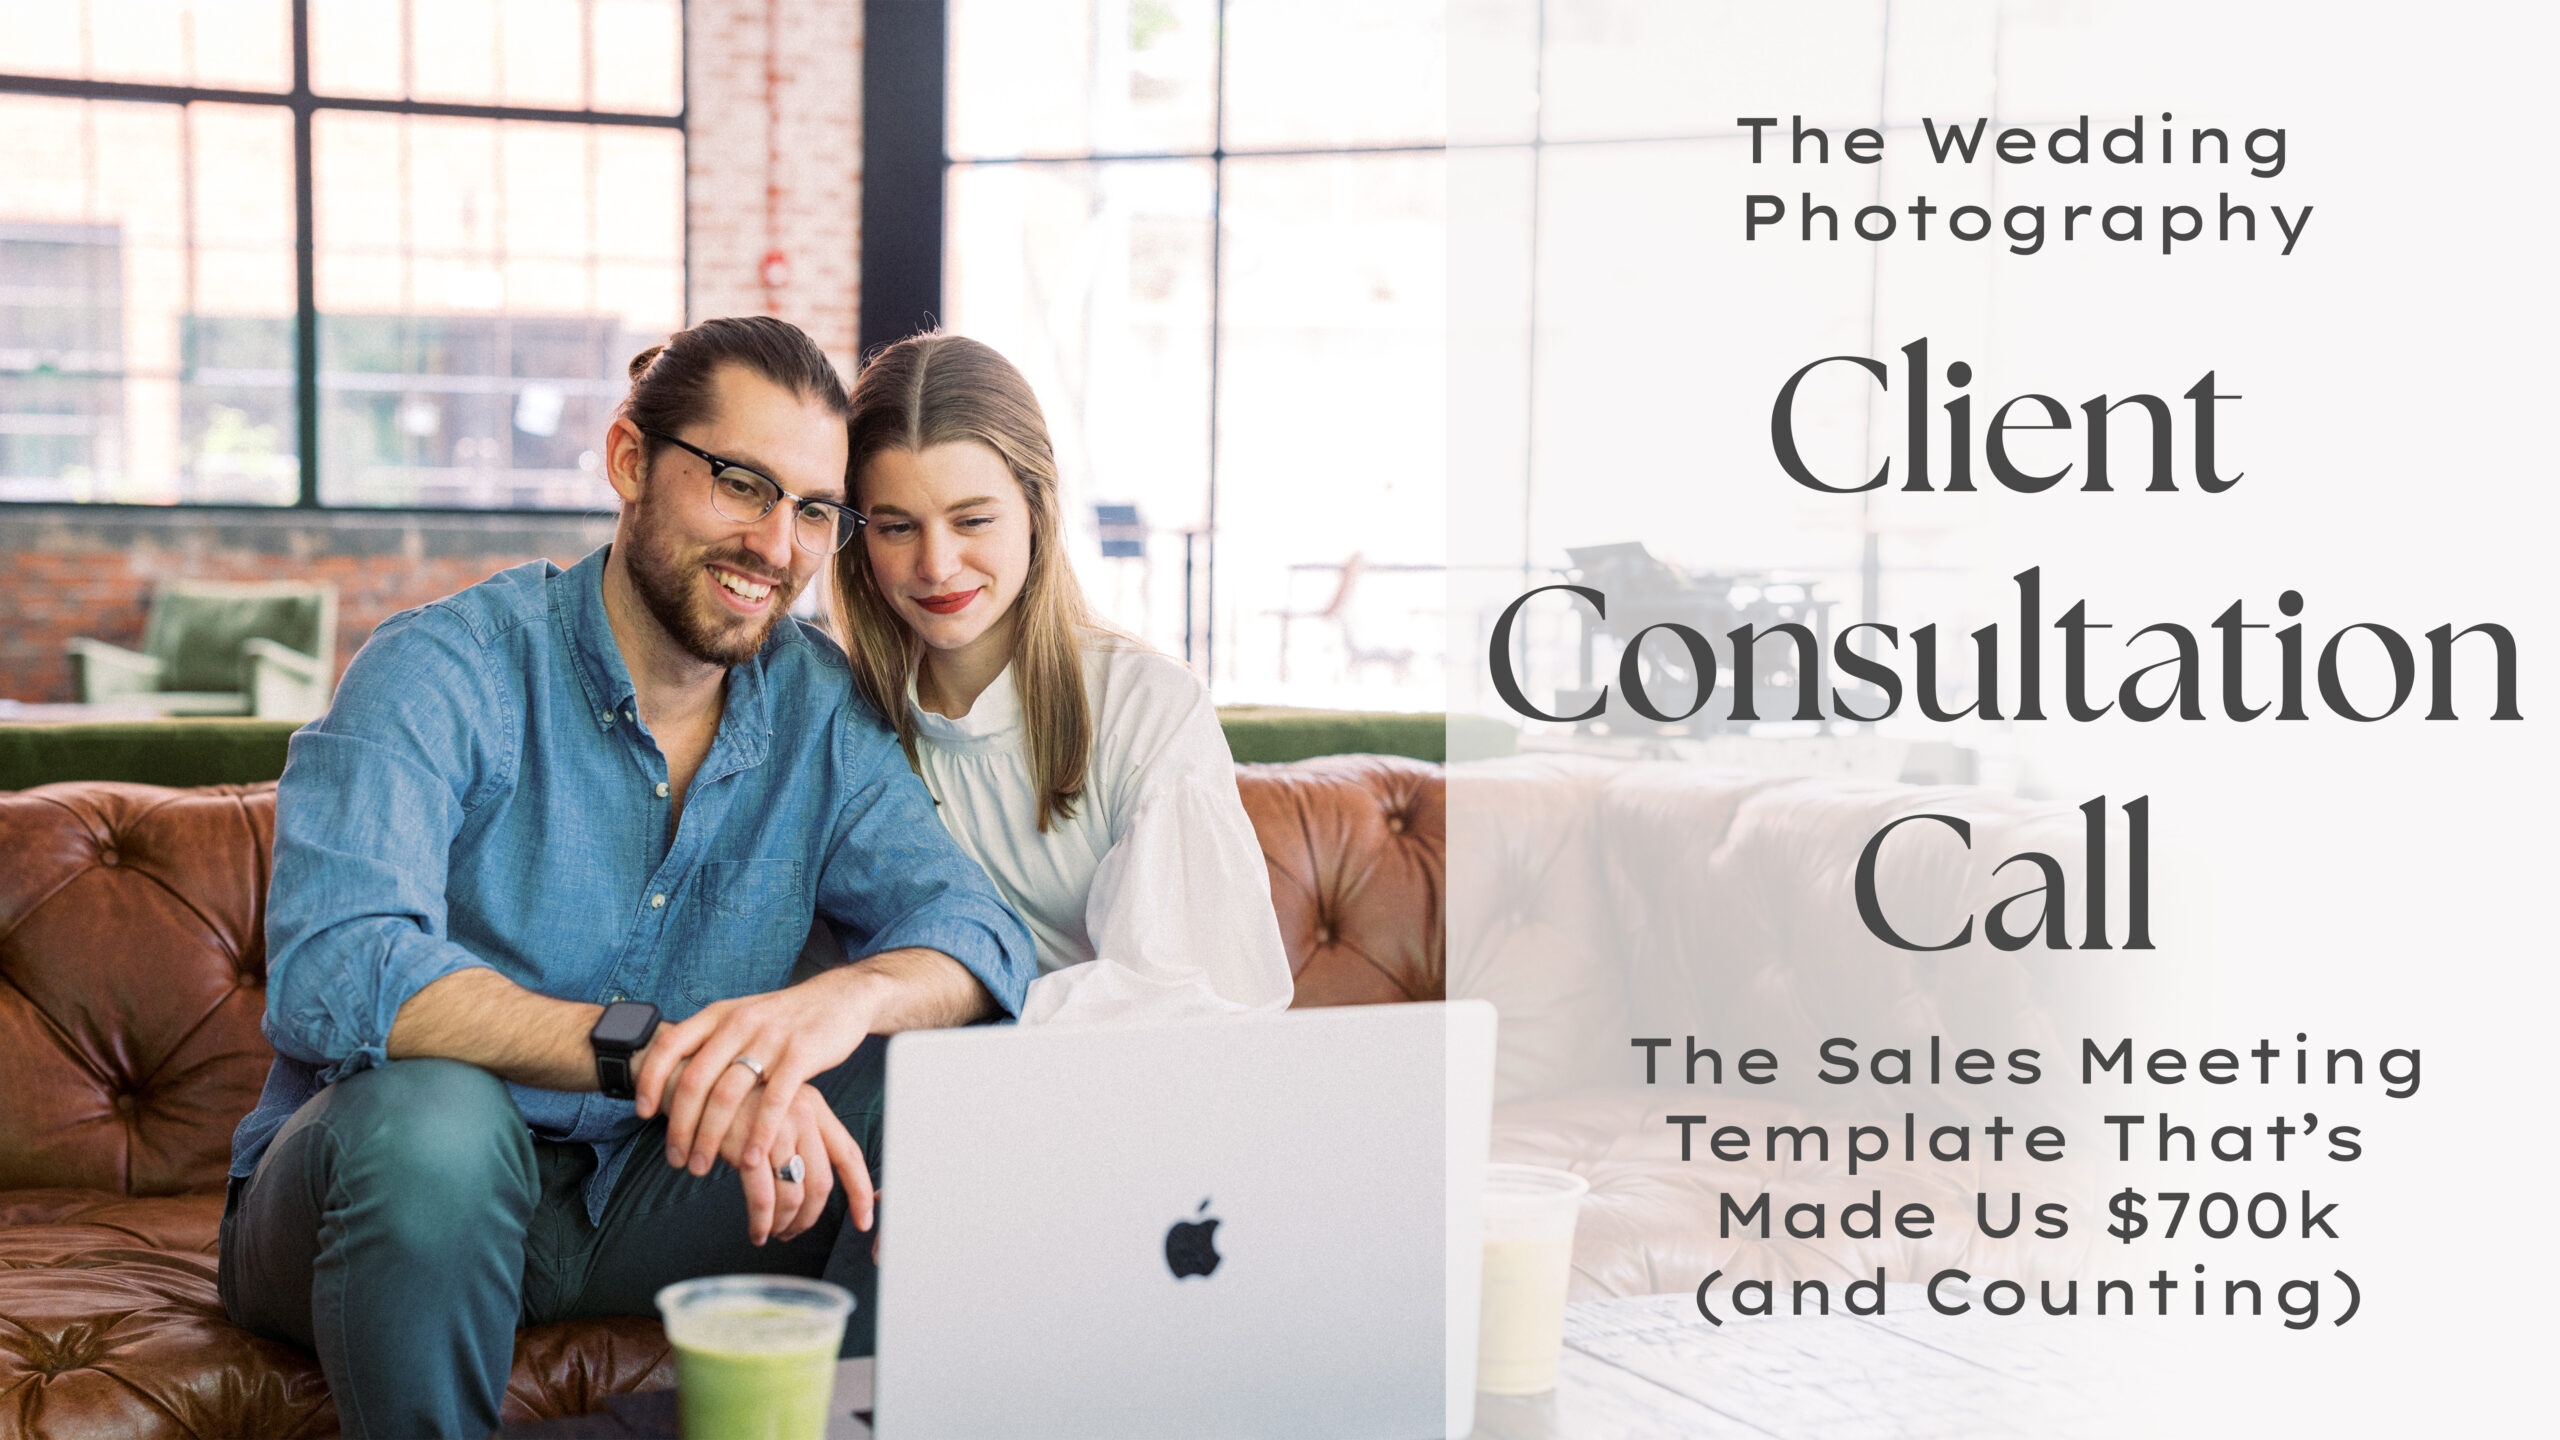 How to run a photography client consultation call